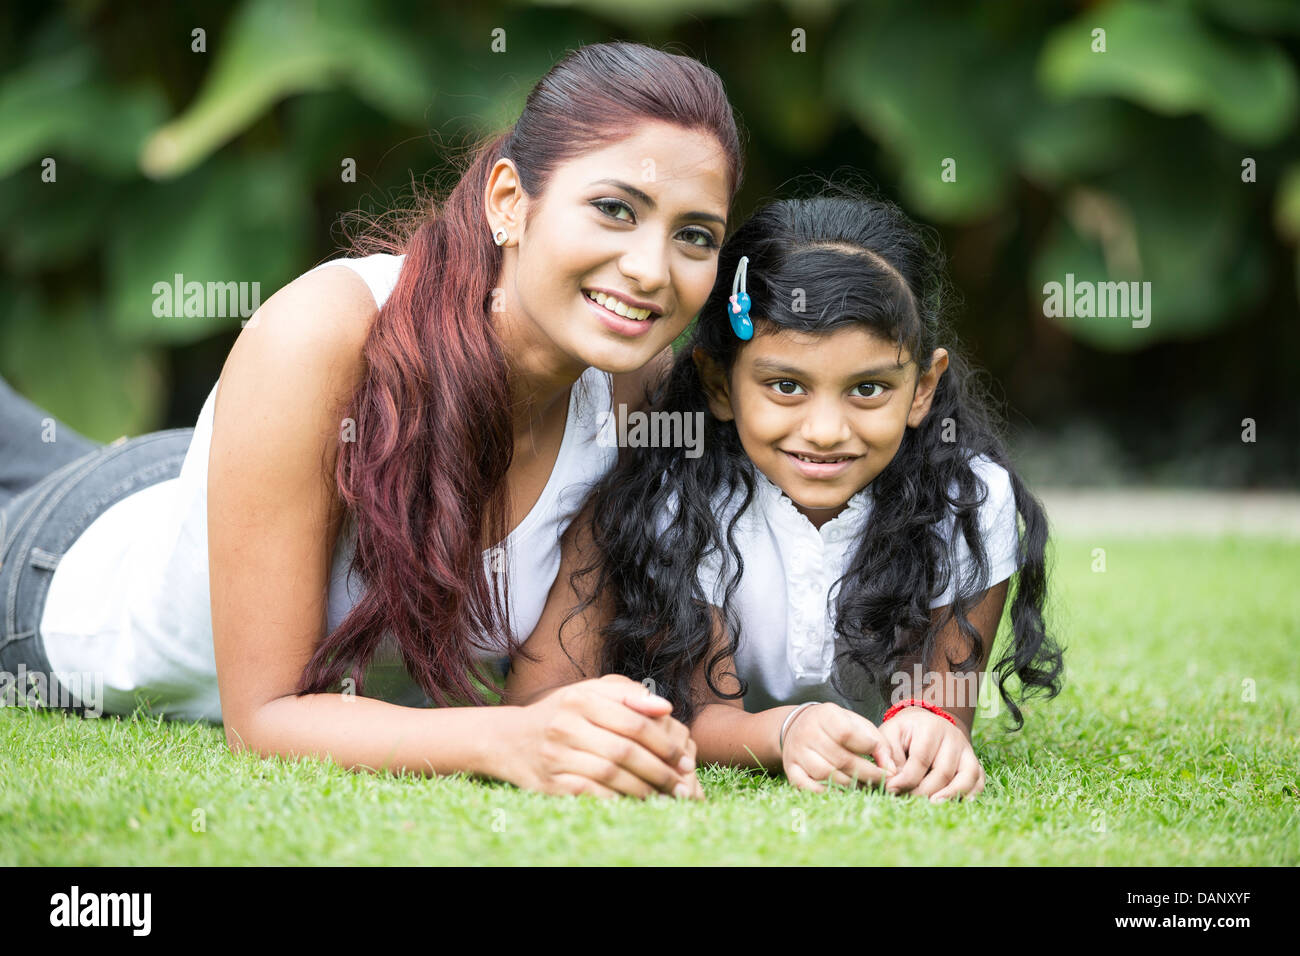 Happy Indian mother and daughter playing in the park. Lifestyle image. Stock Photo